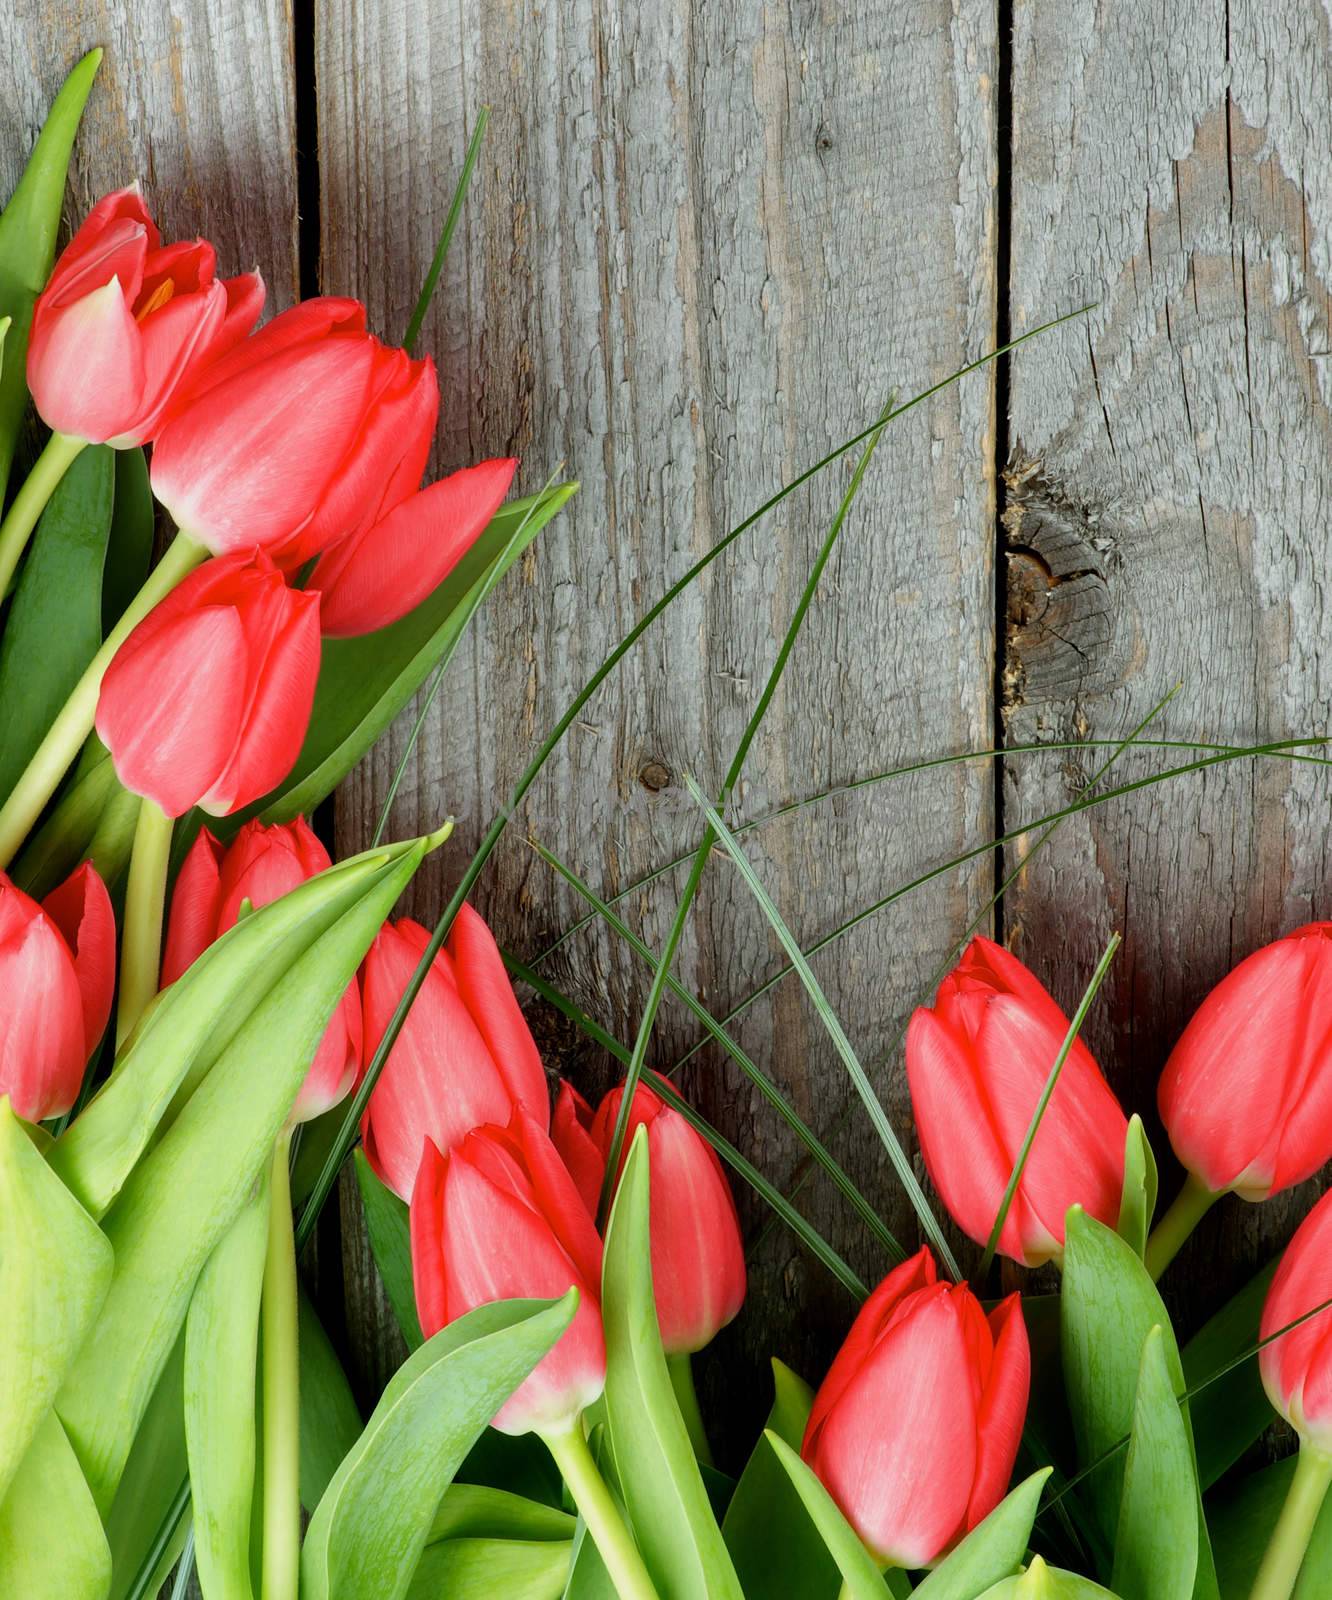 Corner Border of Beautiful Spring Red Tulips with Green Grass closeup on Rustic Wooden background. Top View